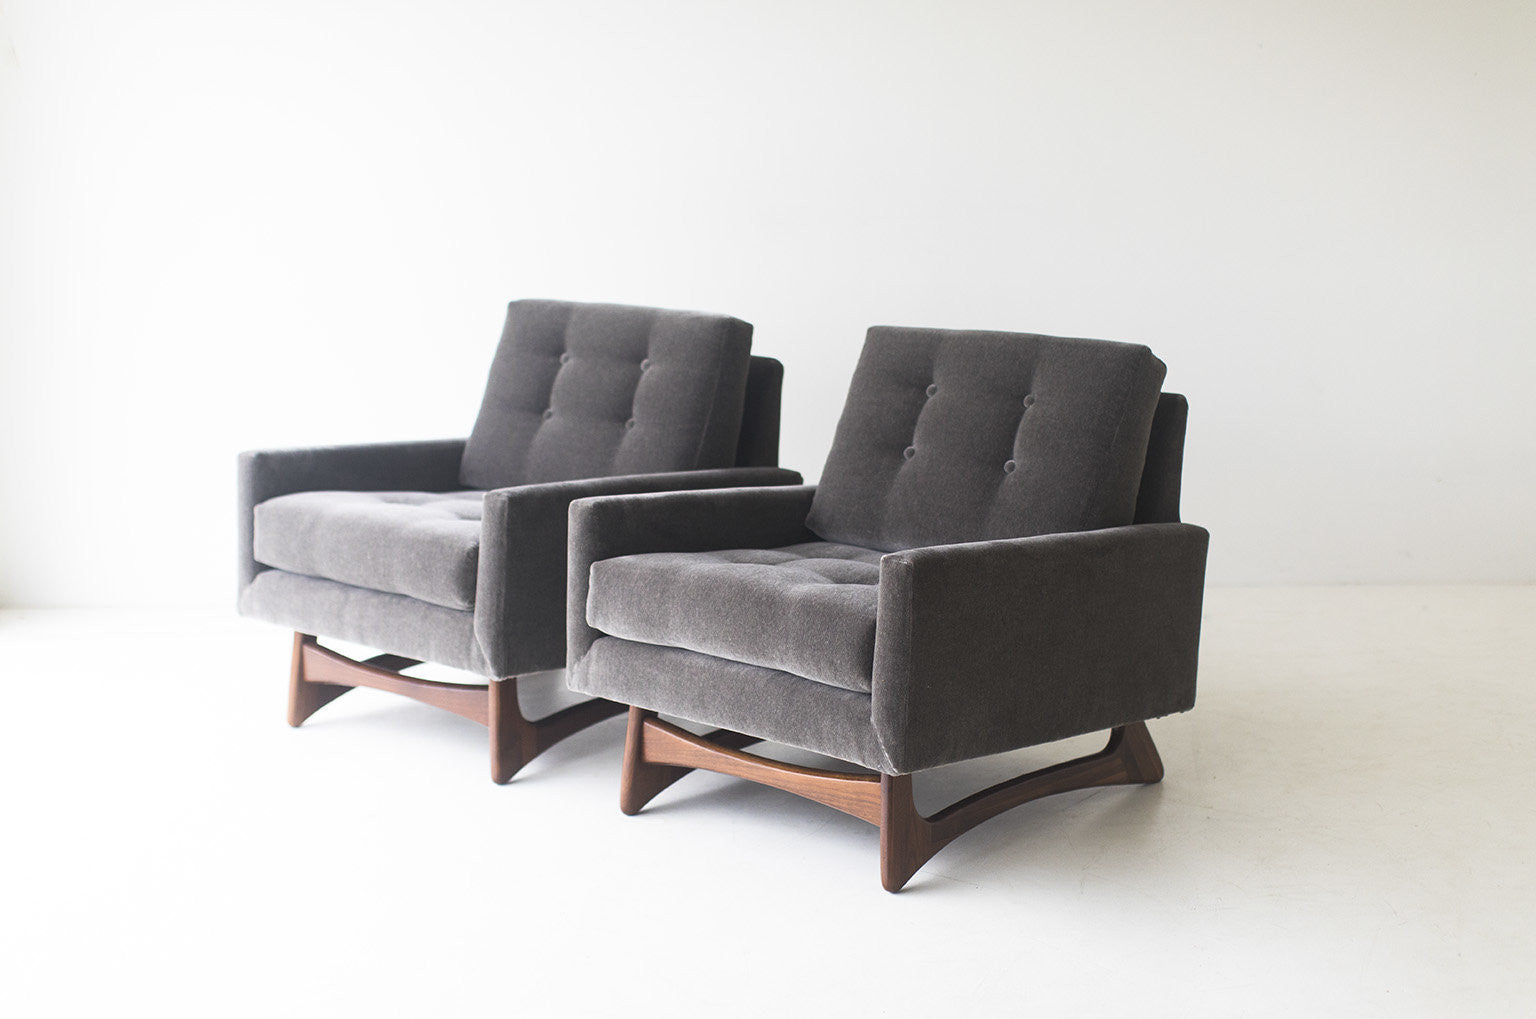 Adrian Pearsall Lounge Chairs for Craft Associates Inc. - 03061701